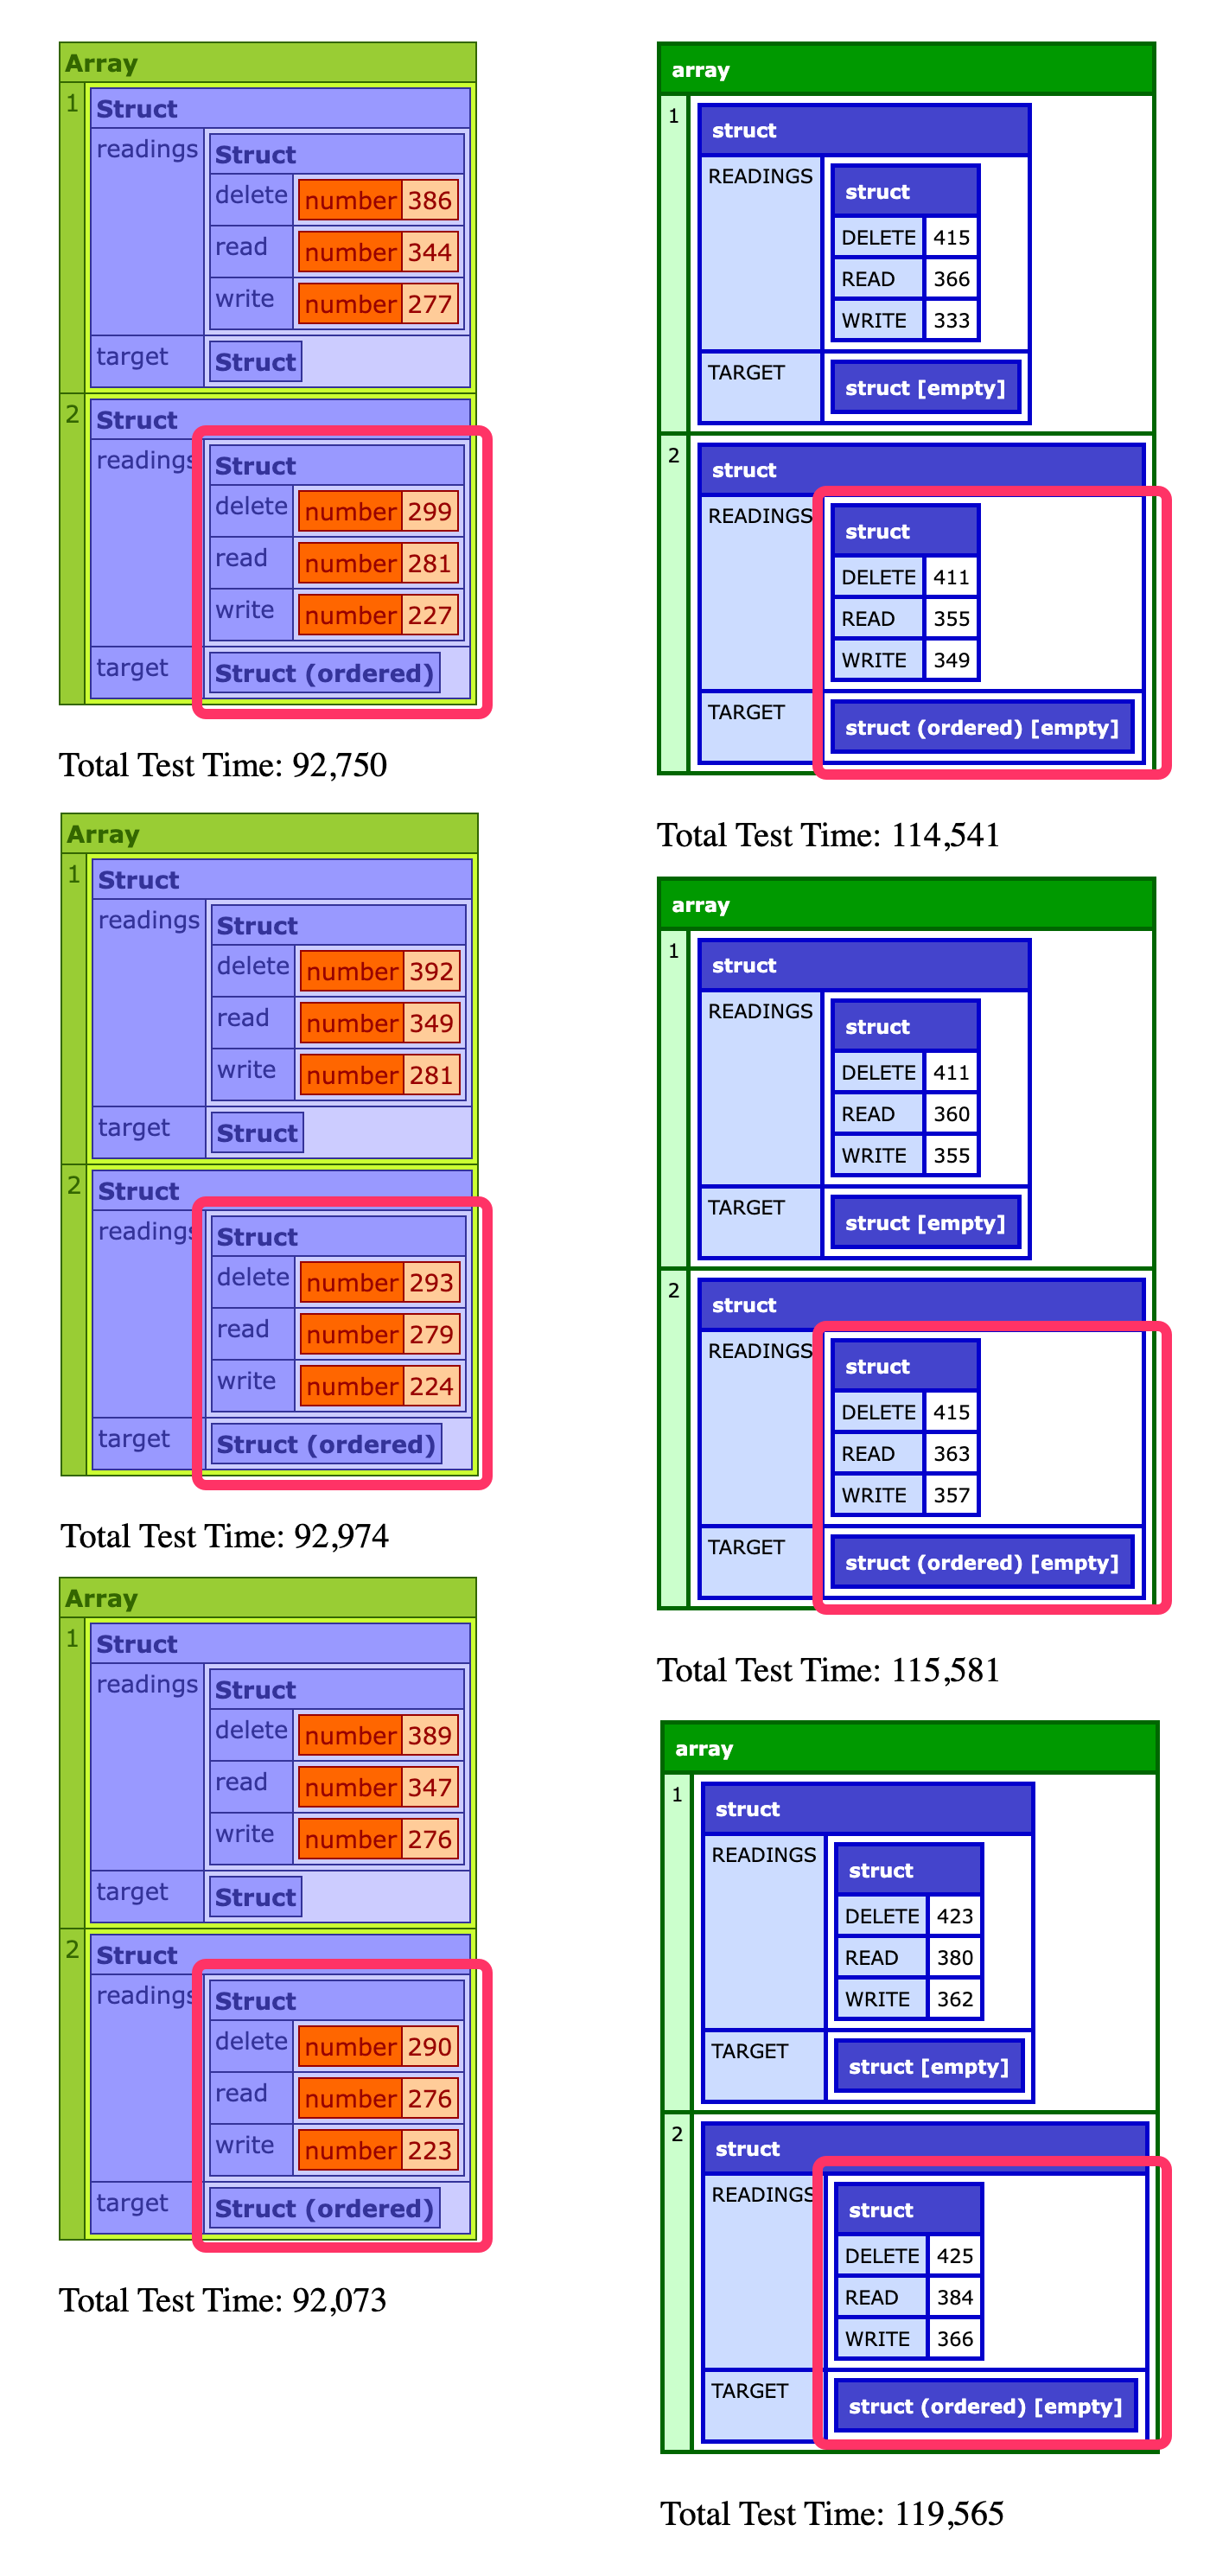 Access time test results for structs and ordered structs, 3 trials each, in ColdFusion.